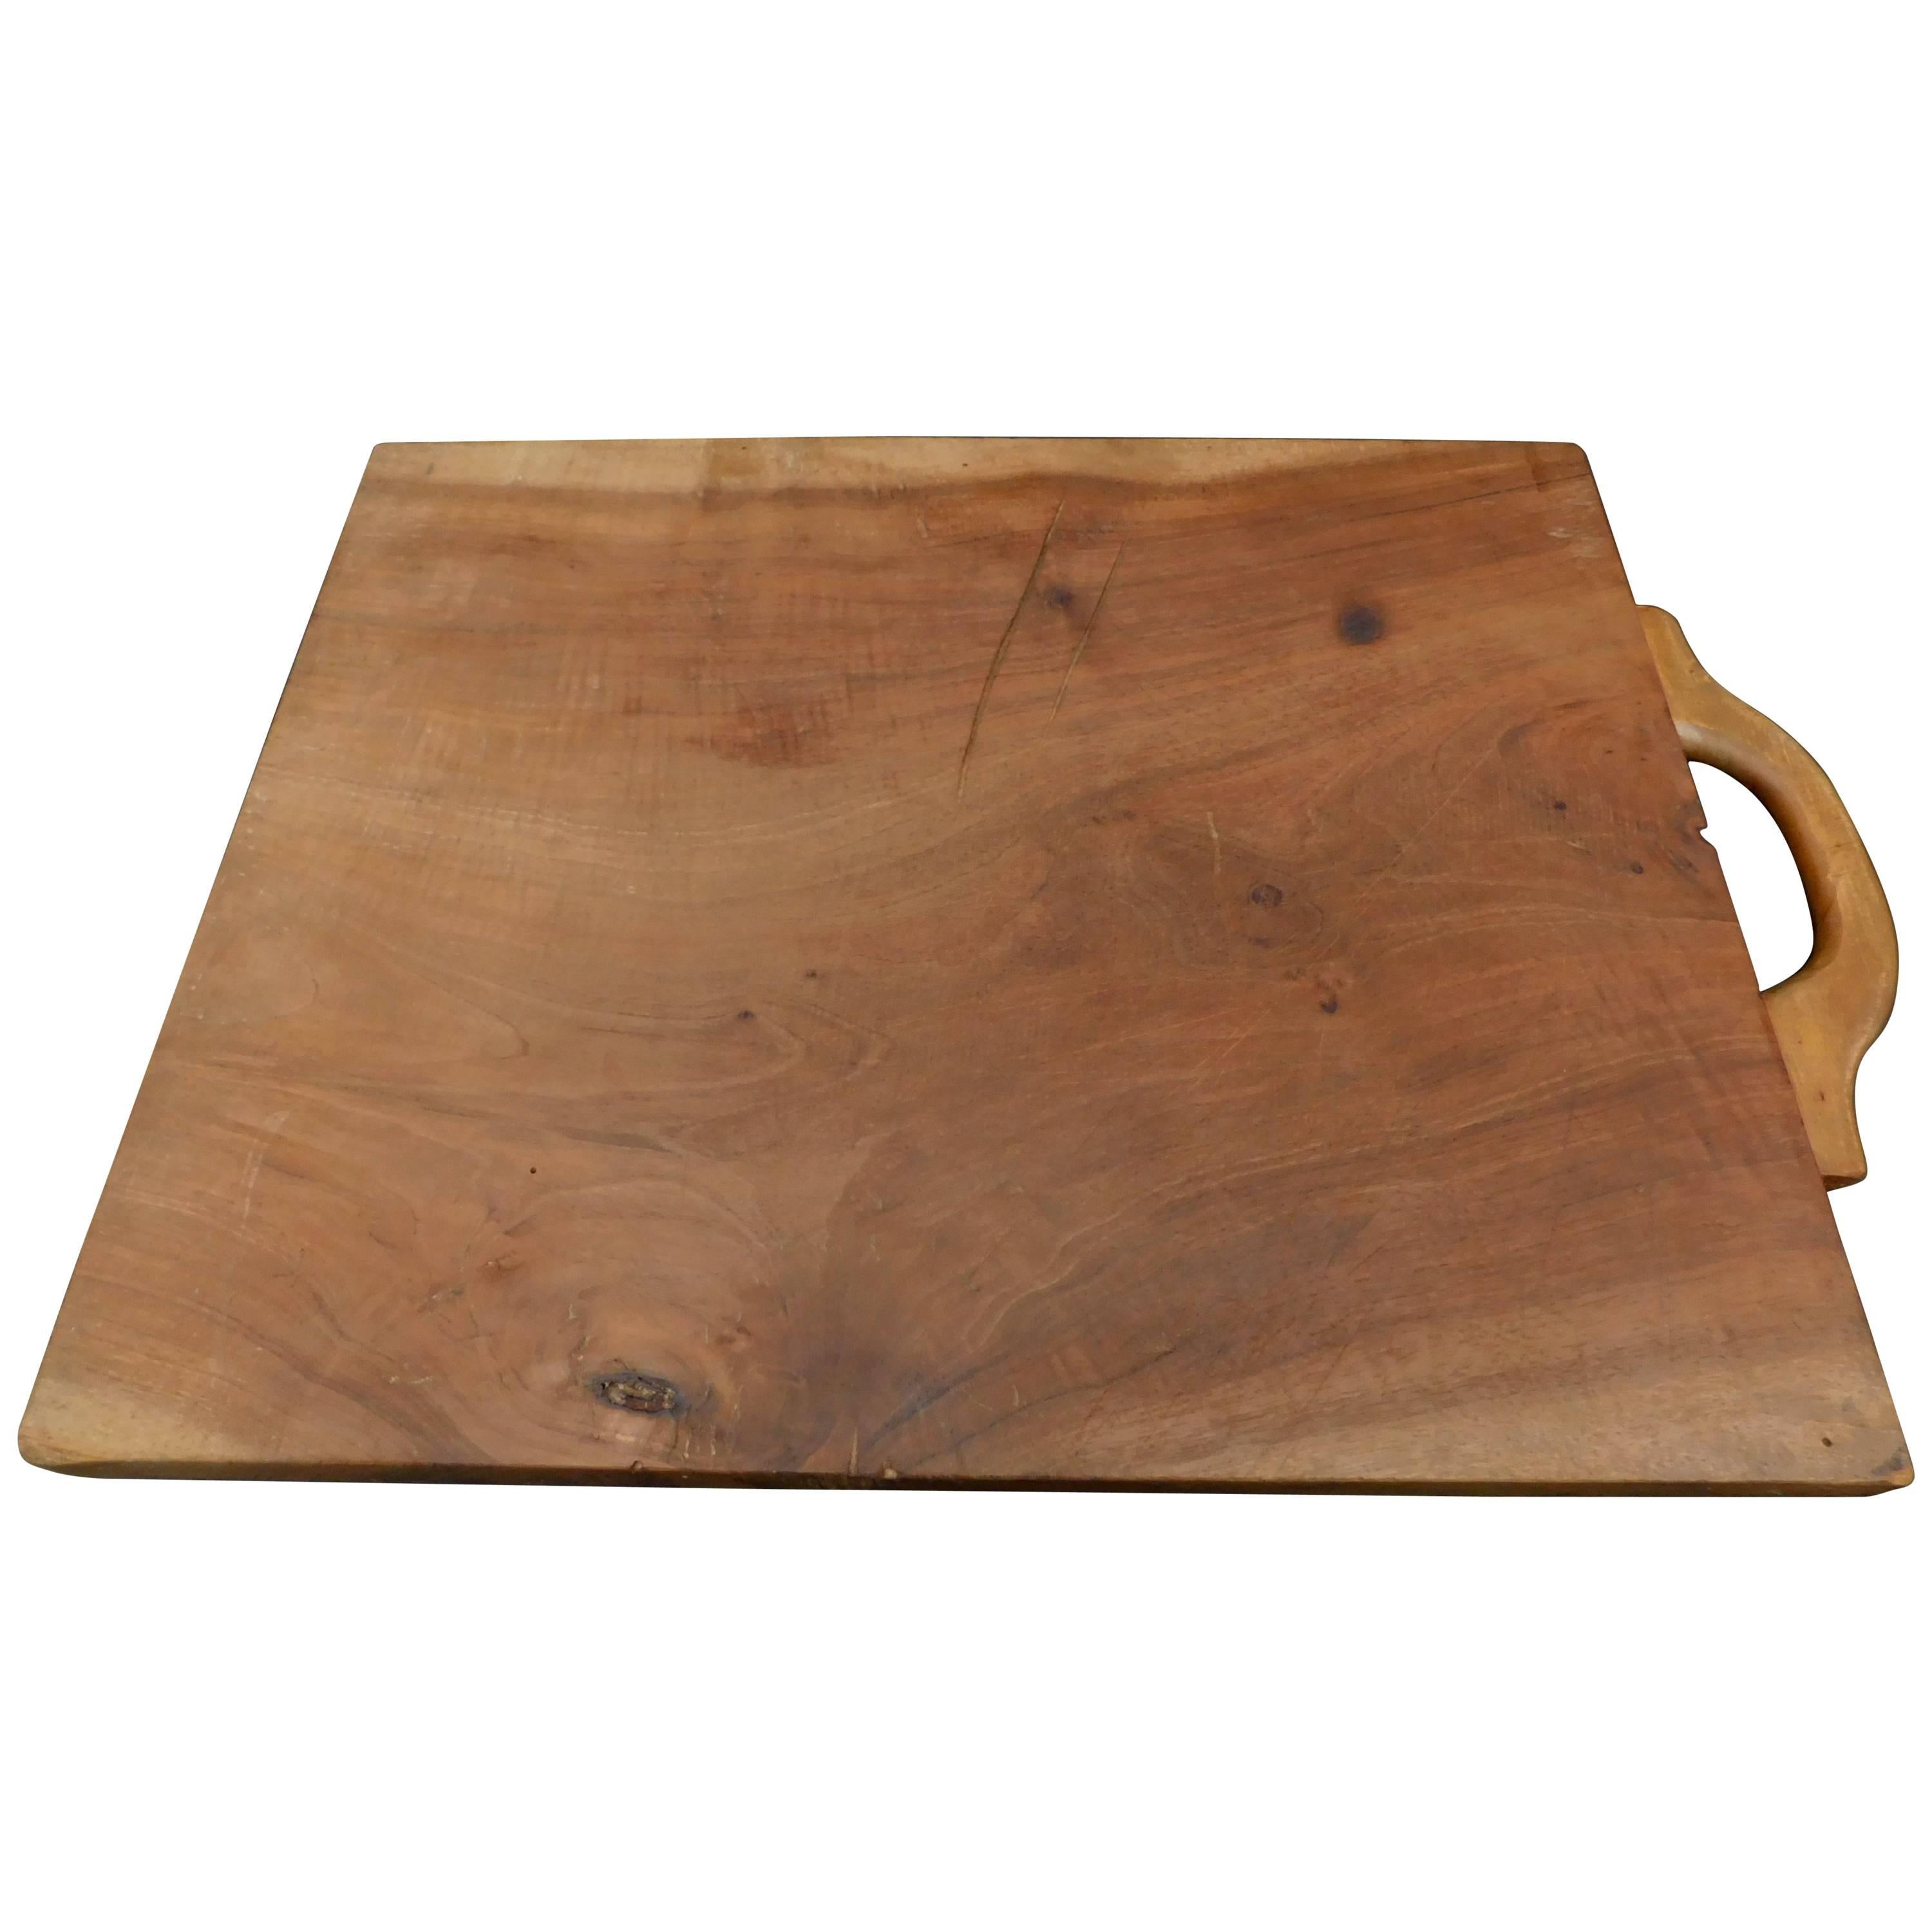 French Wild Cherry Wood Cutting board Made From One Wide Plank.